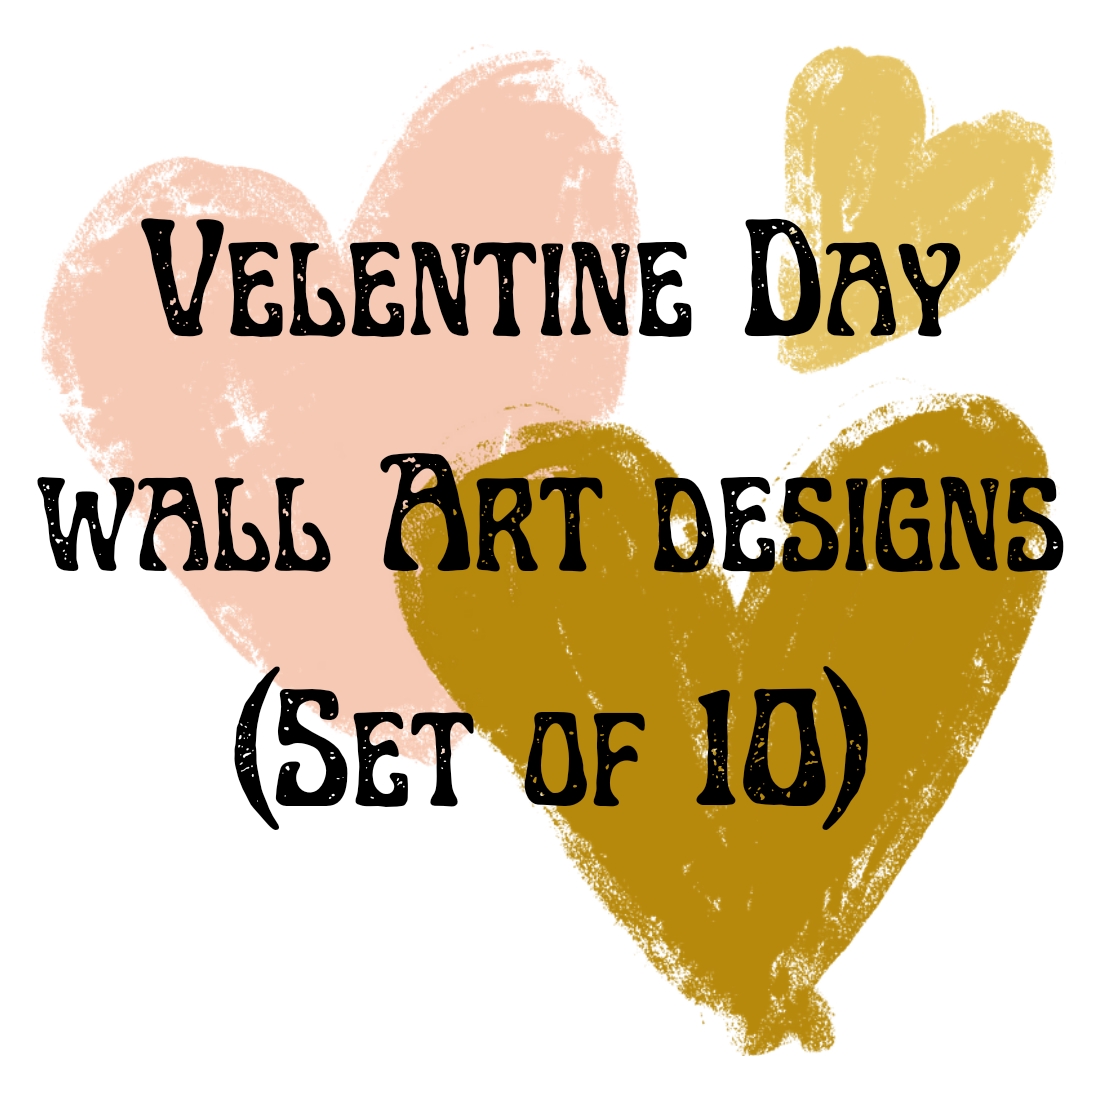 Eternal Love Gallery: Captivating Valentine's Day Wall Art Designs cover image.